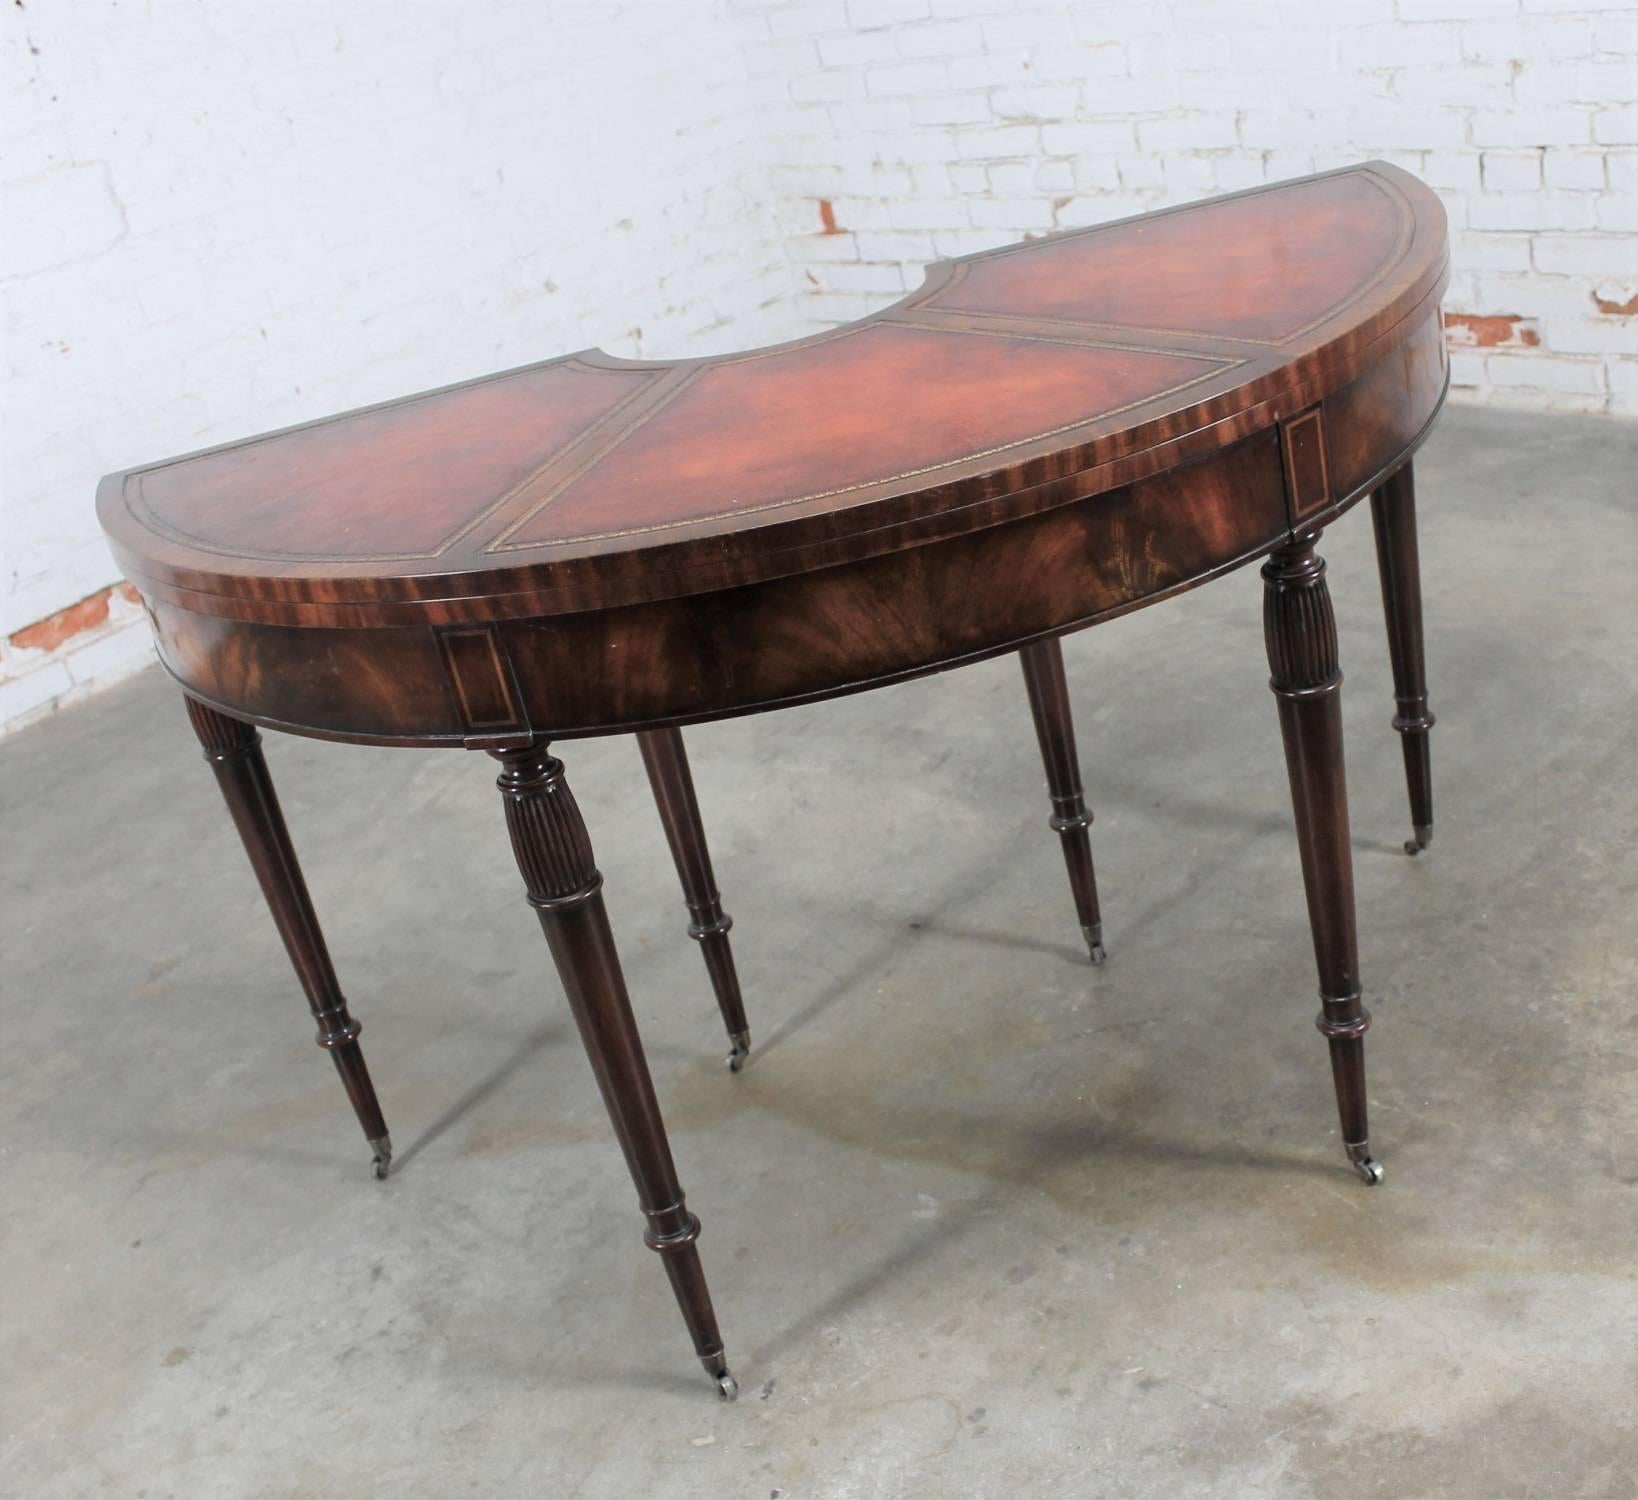 Gorgeous Federal style demilune console table or game table in mahogany with banded leather flip-top and turned and tapered legs. In wonderful vintage condition, circa 20th century by Weiman Heirloom quality tables.

This is a beautifully made